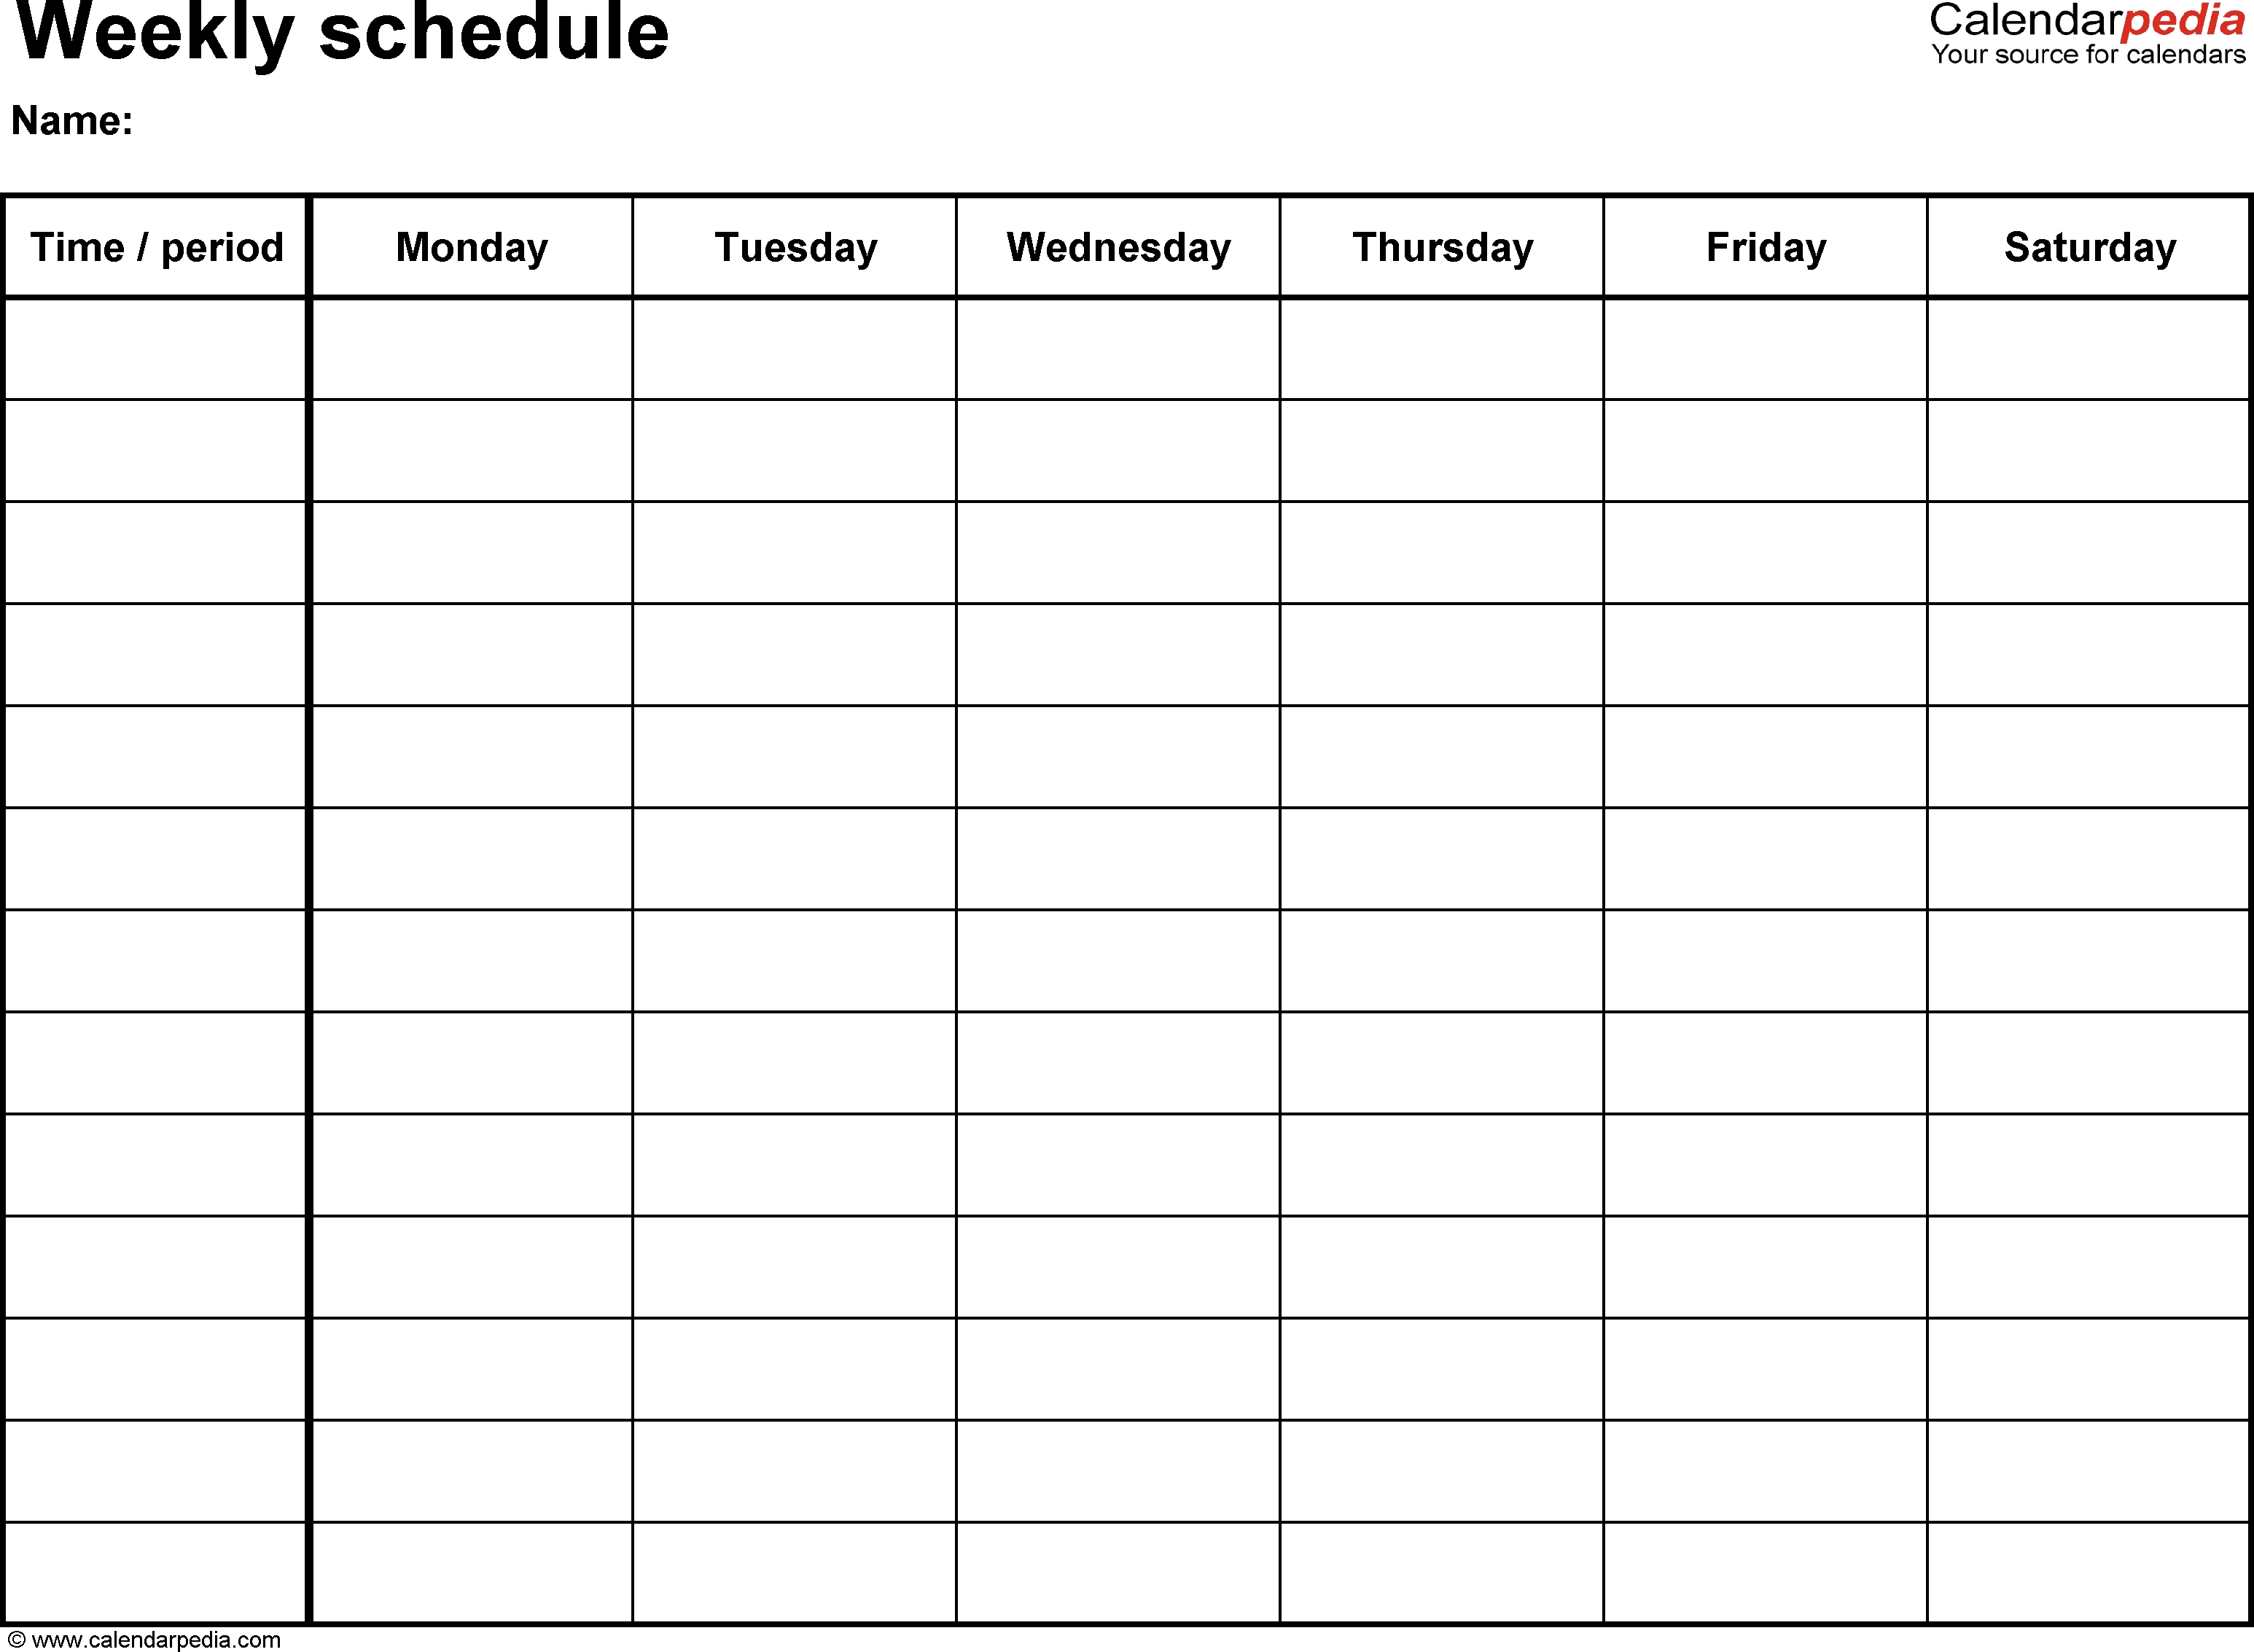 Free Weekly Schedule Templates For Word - 18 Templates  Monday To Friday Weekly Planner